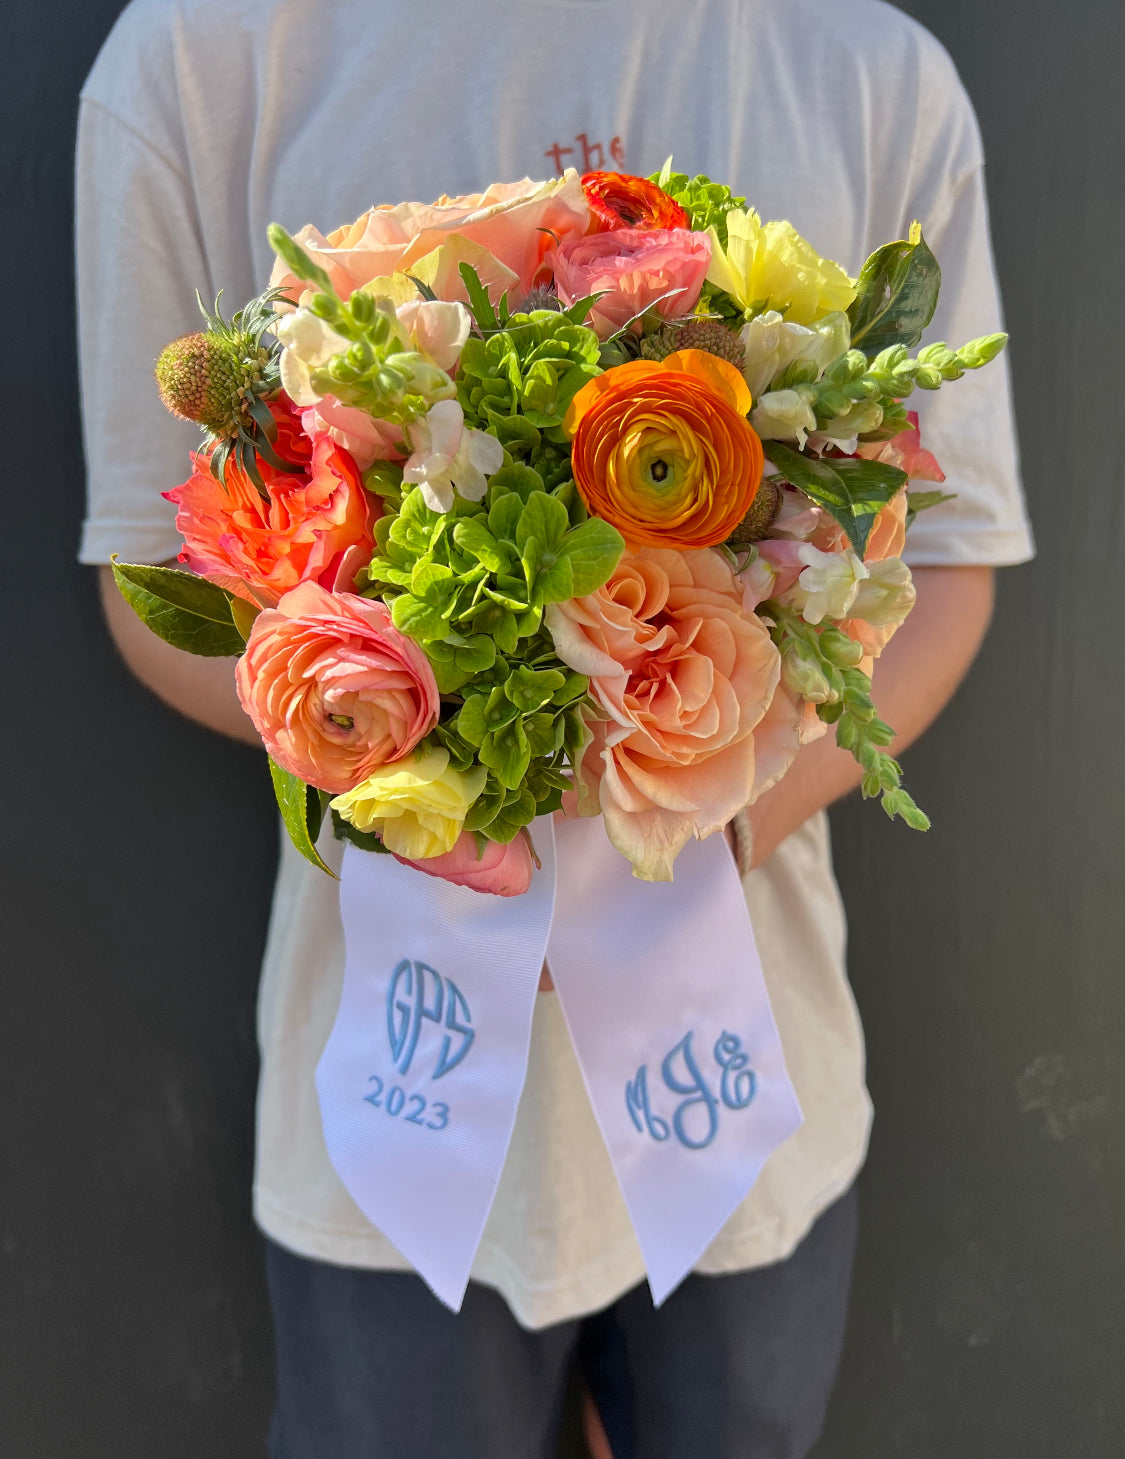 Bouquet Ribbon Monogram : Kingsport, TN Florist : Same Day Flower Delivery  for any occasion